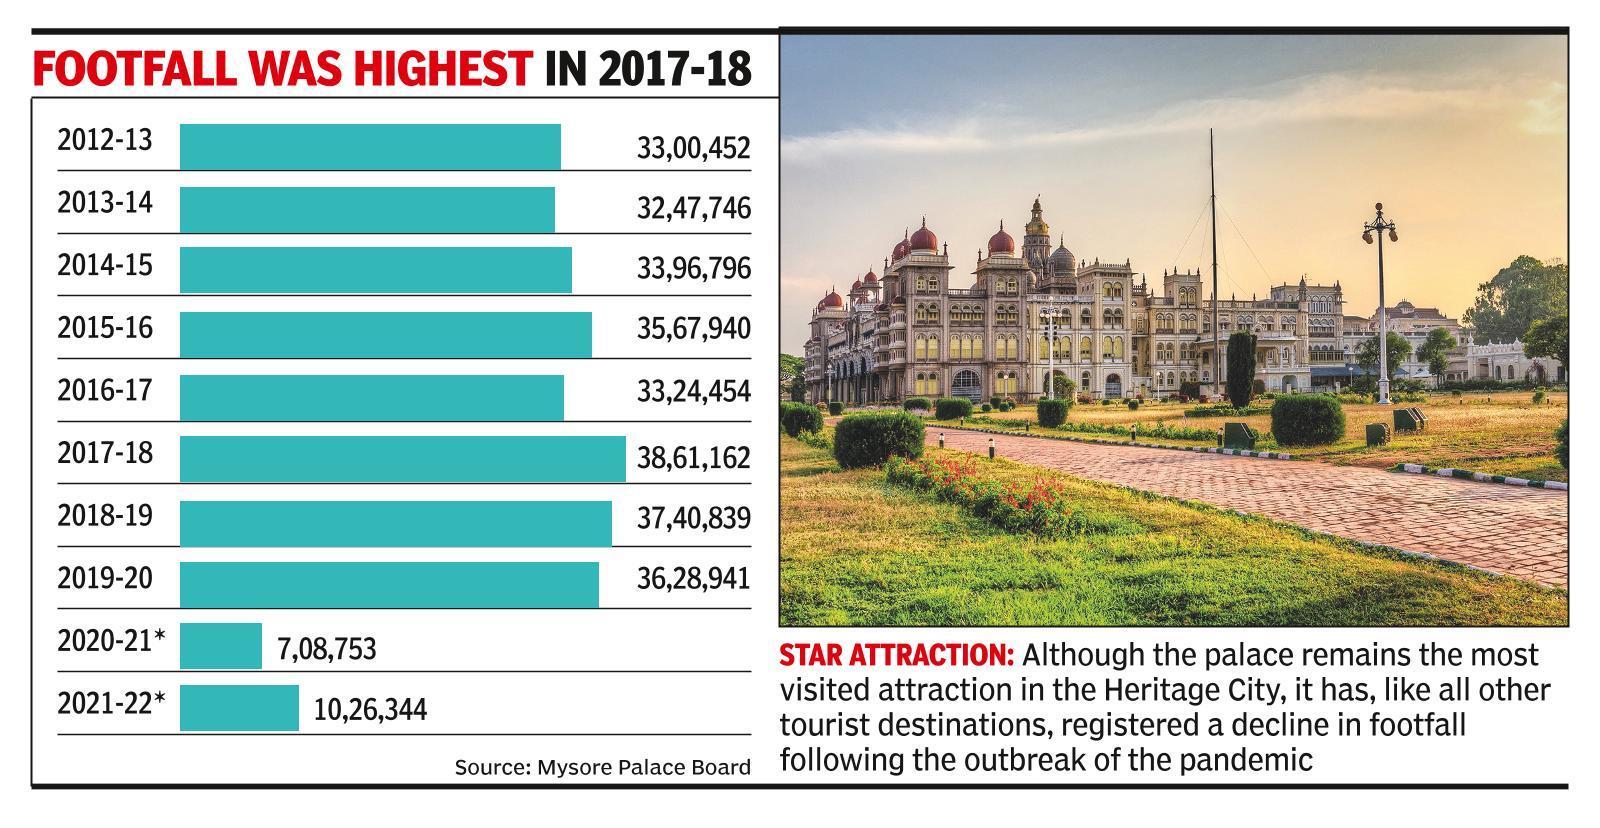 Visitors to Mysore Palace in 2021-22 higher than previous year, but lower than average